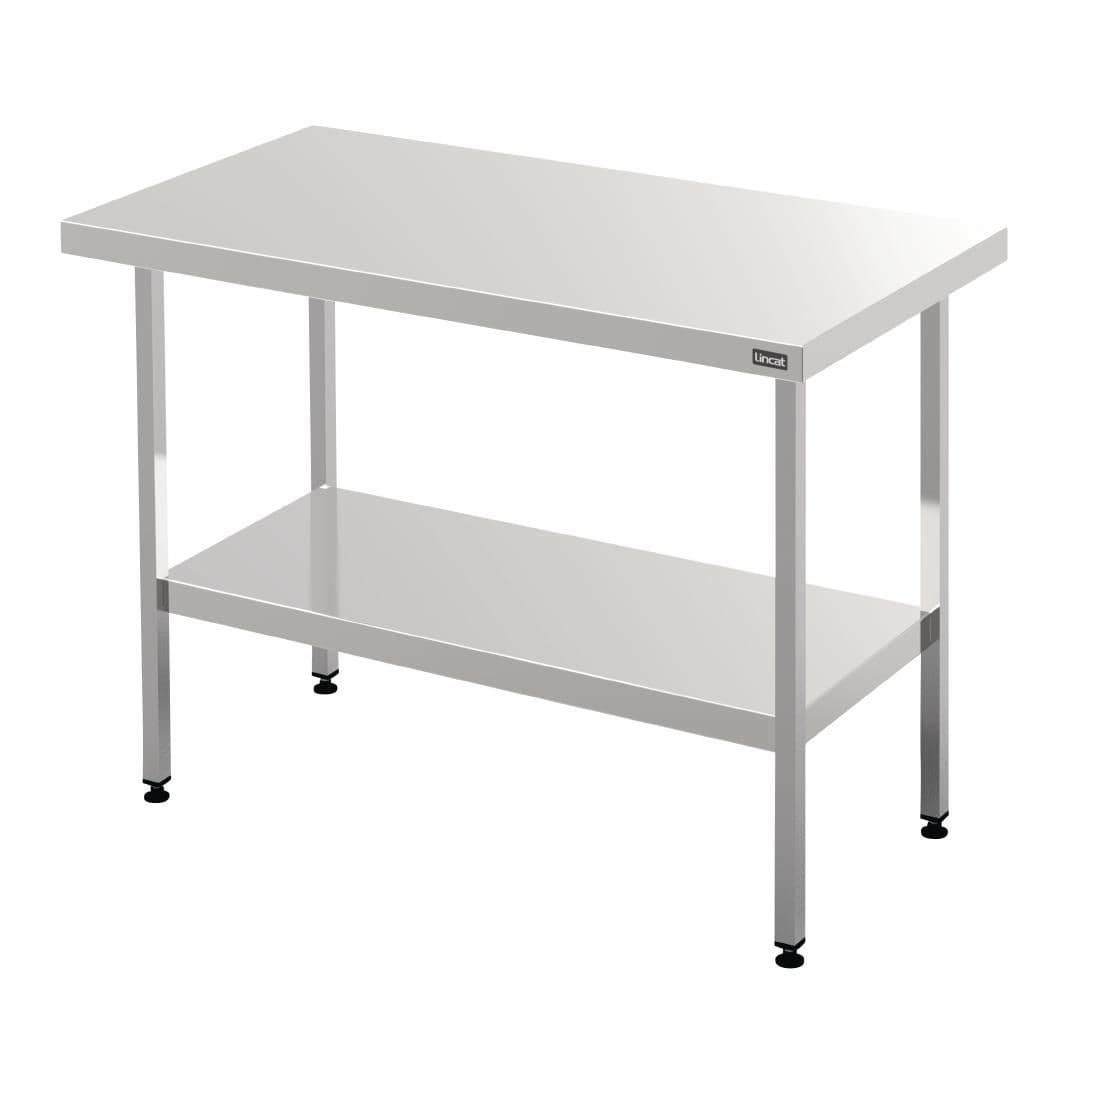 GJ700 Lincat Stainless Steel Centre Table 600mm L6506CT JD Catering Equipment Solutions Ltd